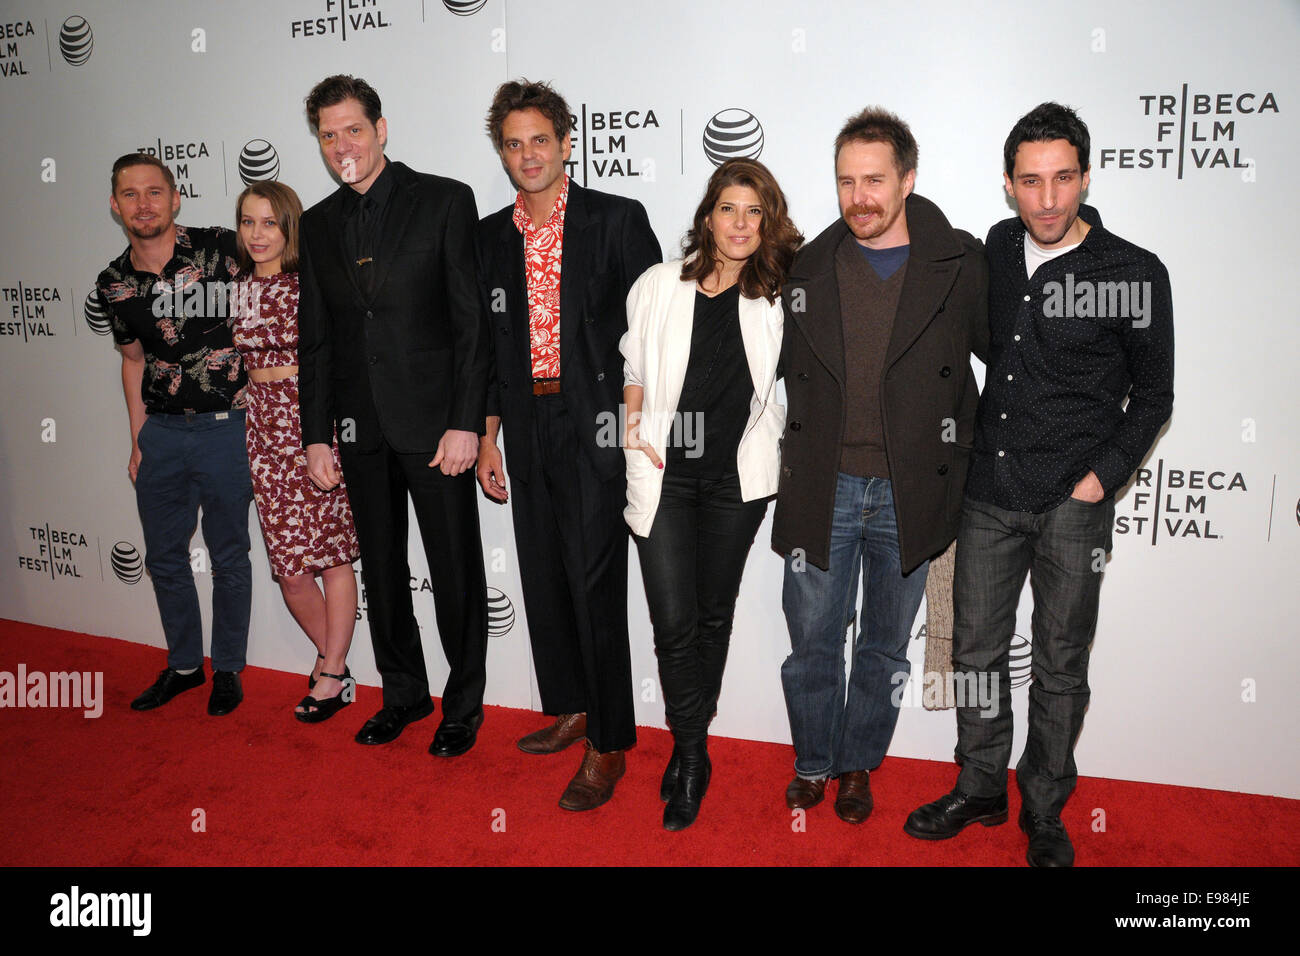 2014 Tribeca Film Festival - 'Loitering With Intent' Premiere -Red Carpet Arrivals  Featuring: Brian Geraghty,Isabelle McNally,Adam Rapp,Ivan Martin,Marisa Tomei,Sam Rockwell,Michael Godere Where: Manhattan, New York, United States When: 19 Apr 2014 Stock Photo